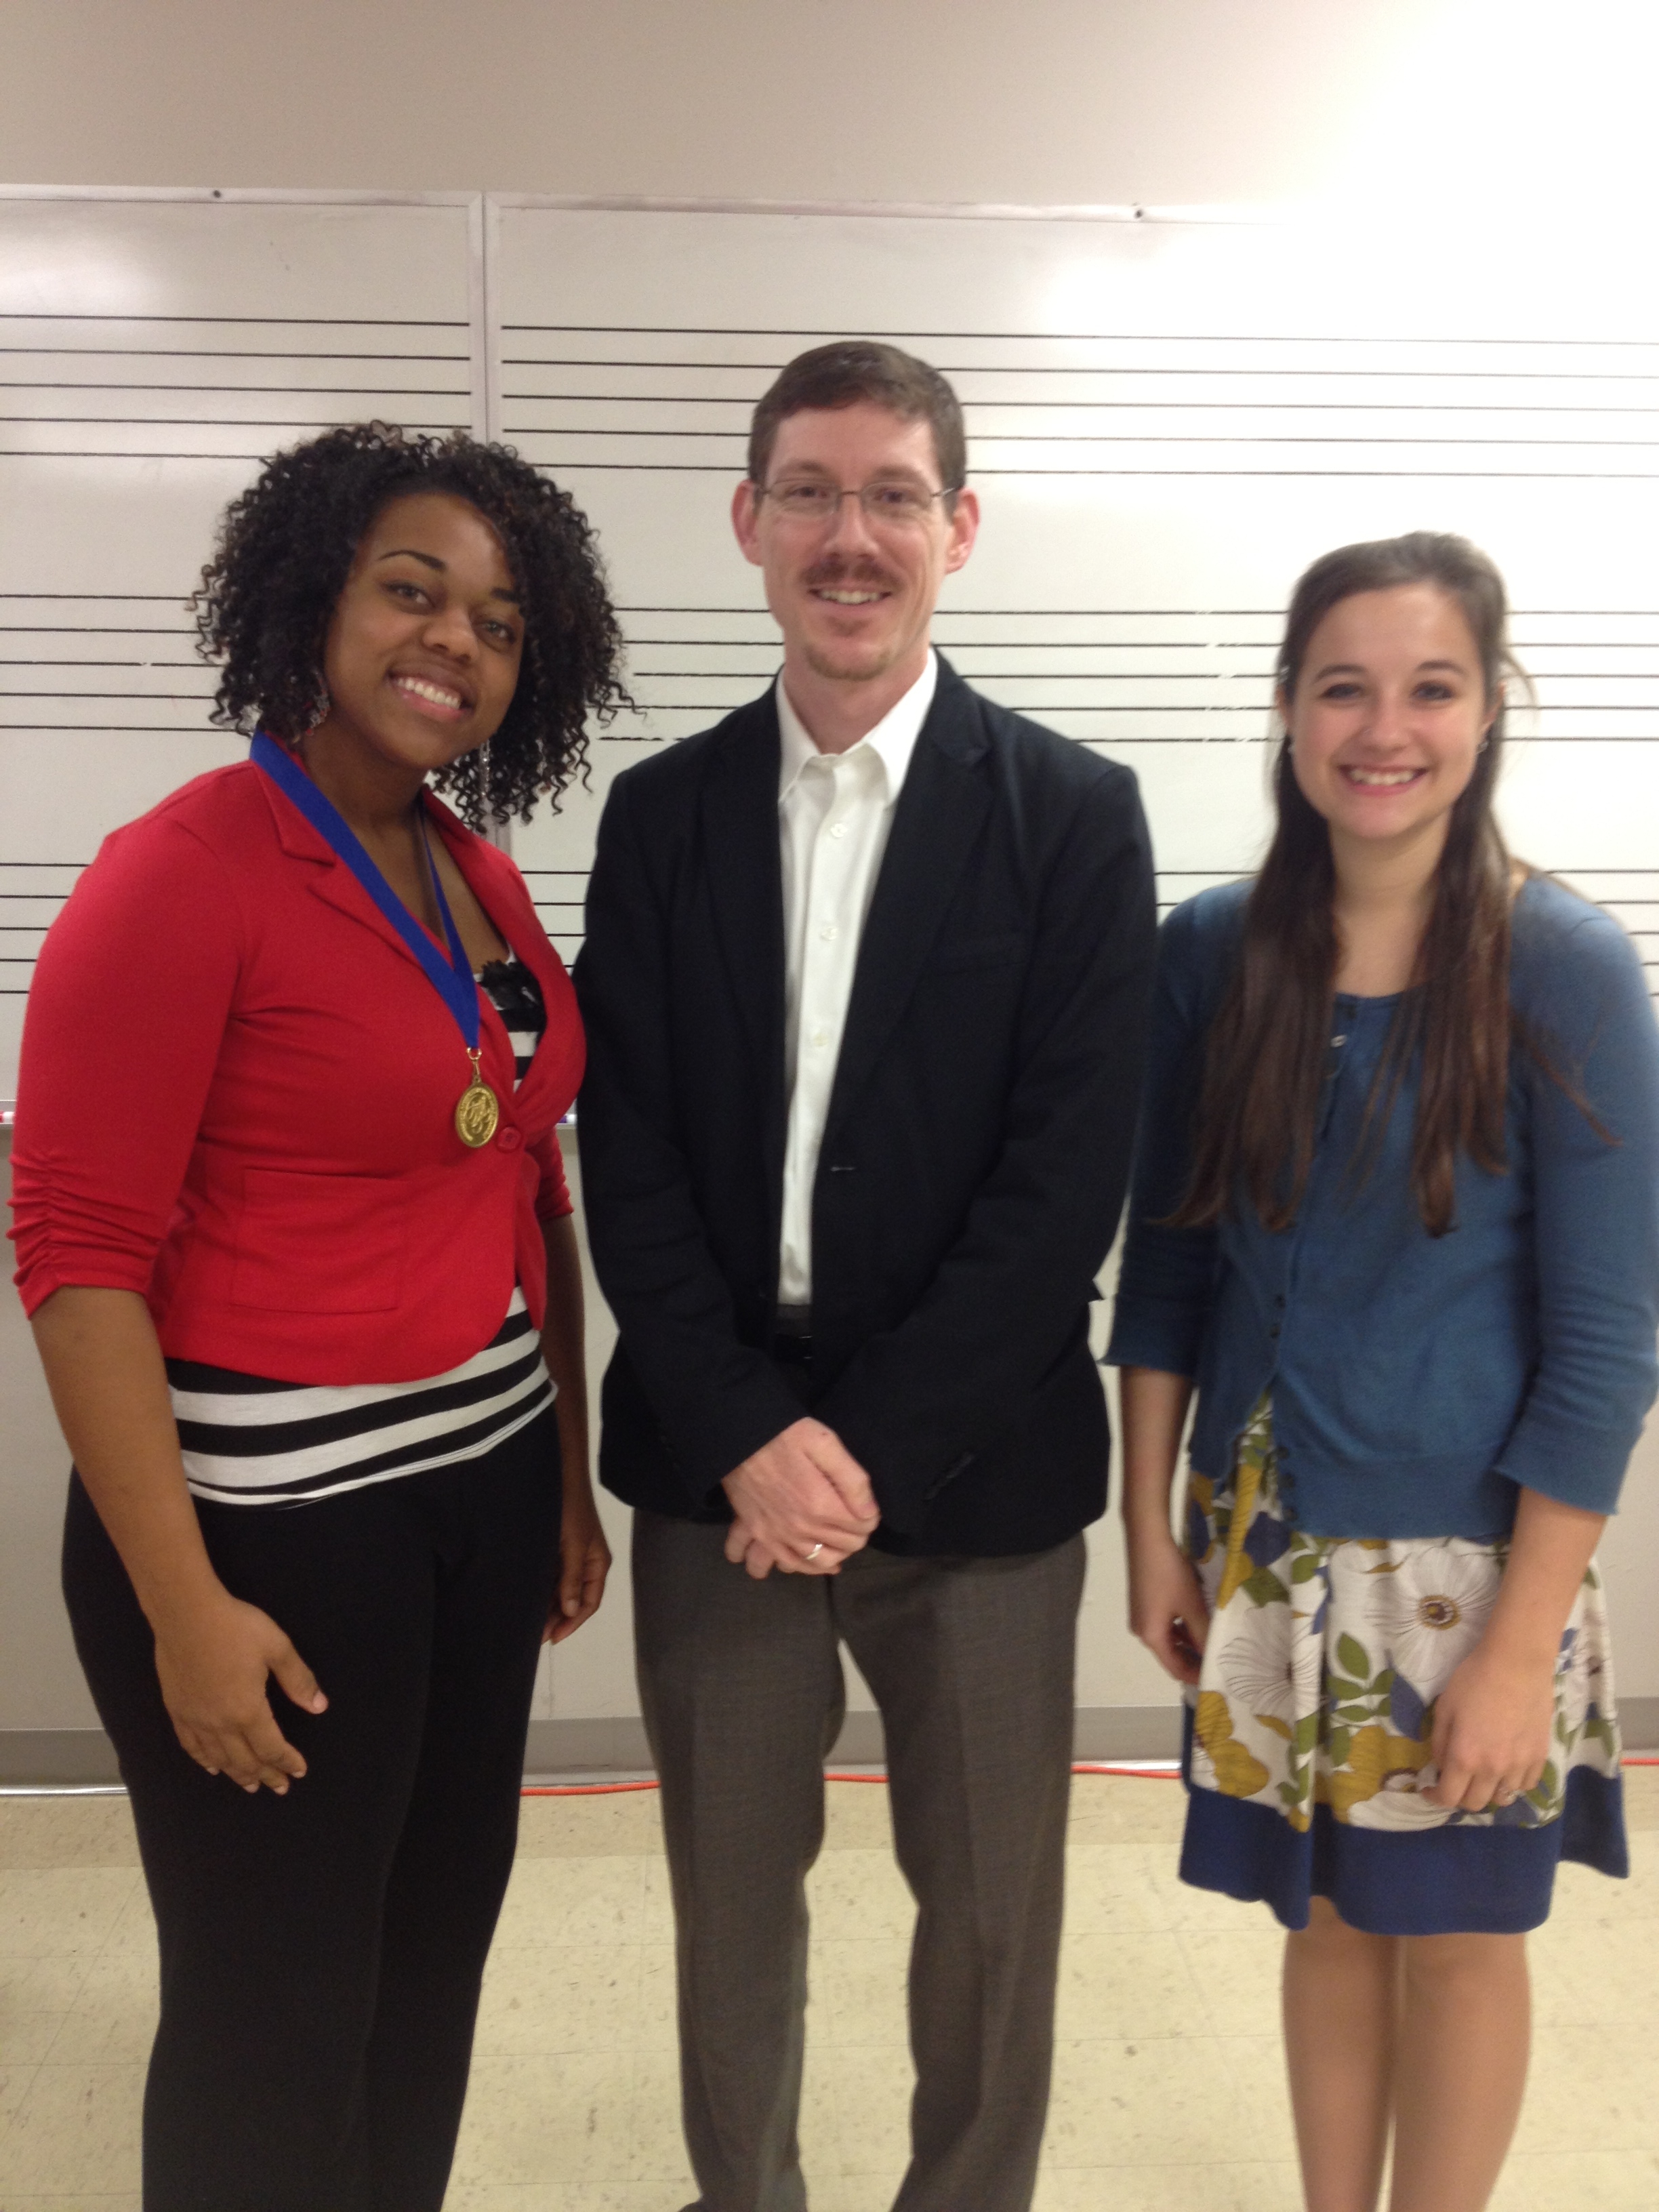 PHOTO: From left, Robyn Rouse, Dr. Scot Humes, Associate Professor of Music at the University of Louisiana at Monroe, and  Jessica Egdorf.